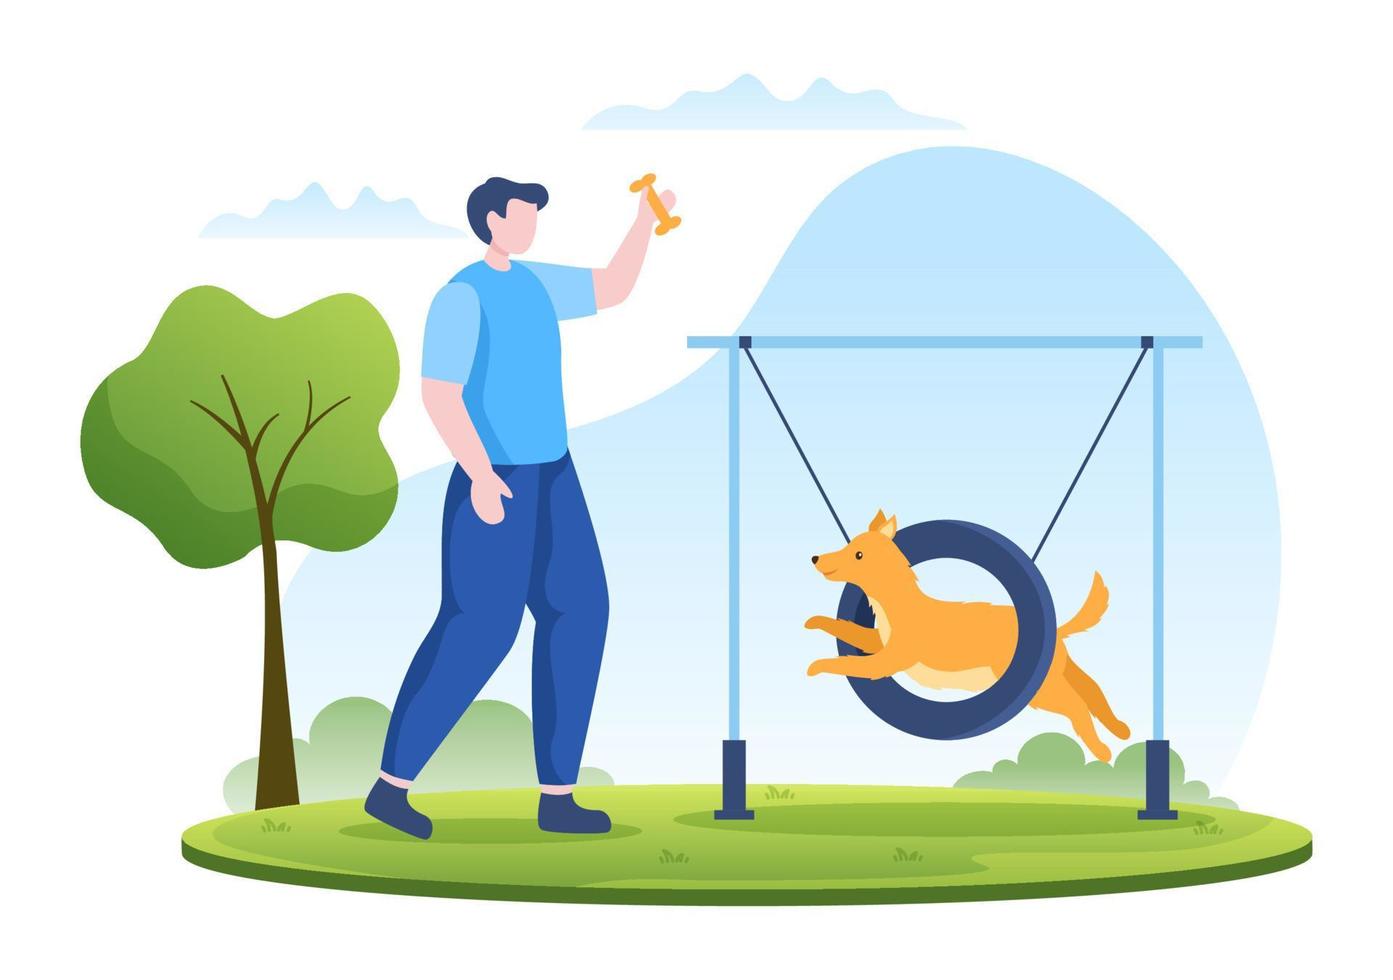 Dogs Training Center at Playground with Instructor Teaching Pets or Play for Tricks and Jumping Skills in Flat Cartoon Background Illustration vector